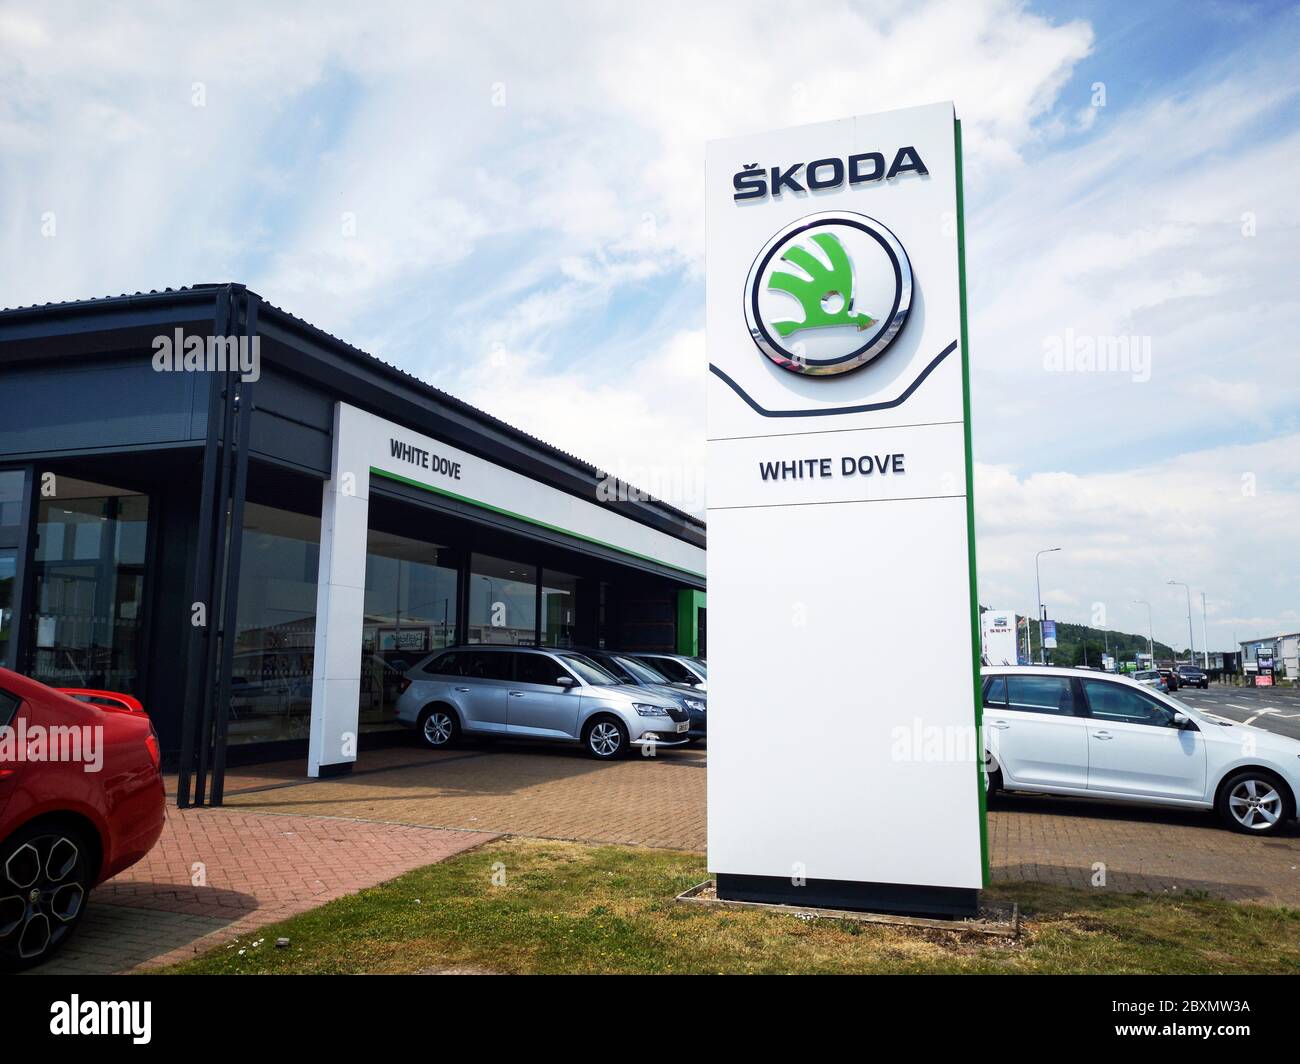 Cardiff, UK: August 19, 2019: Skoda Car Dealership with new and used cars for sale. ŠKODA AUTO - more commonly known as Škoda. Stock Photo